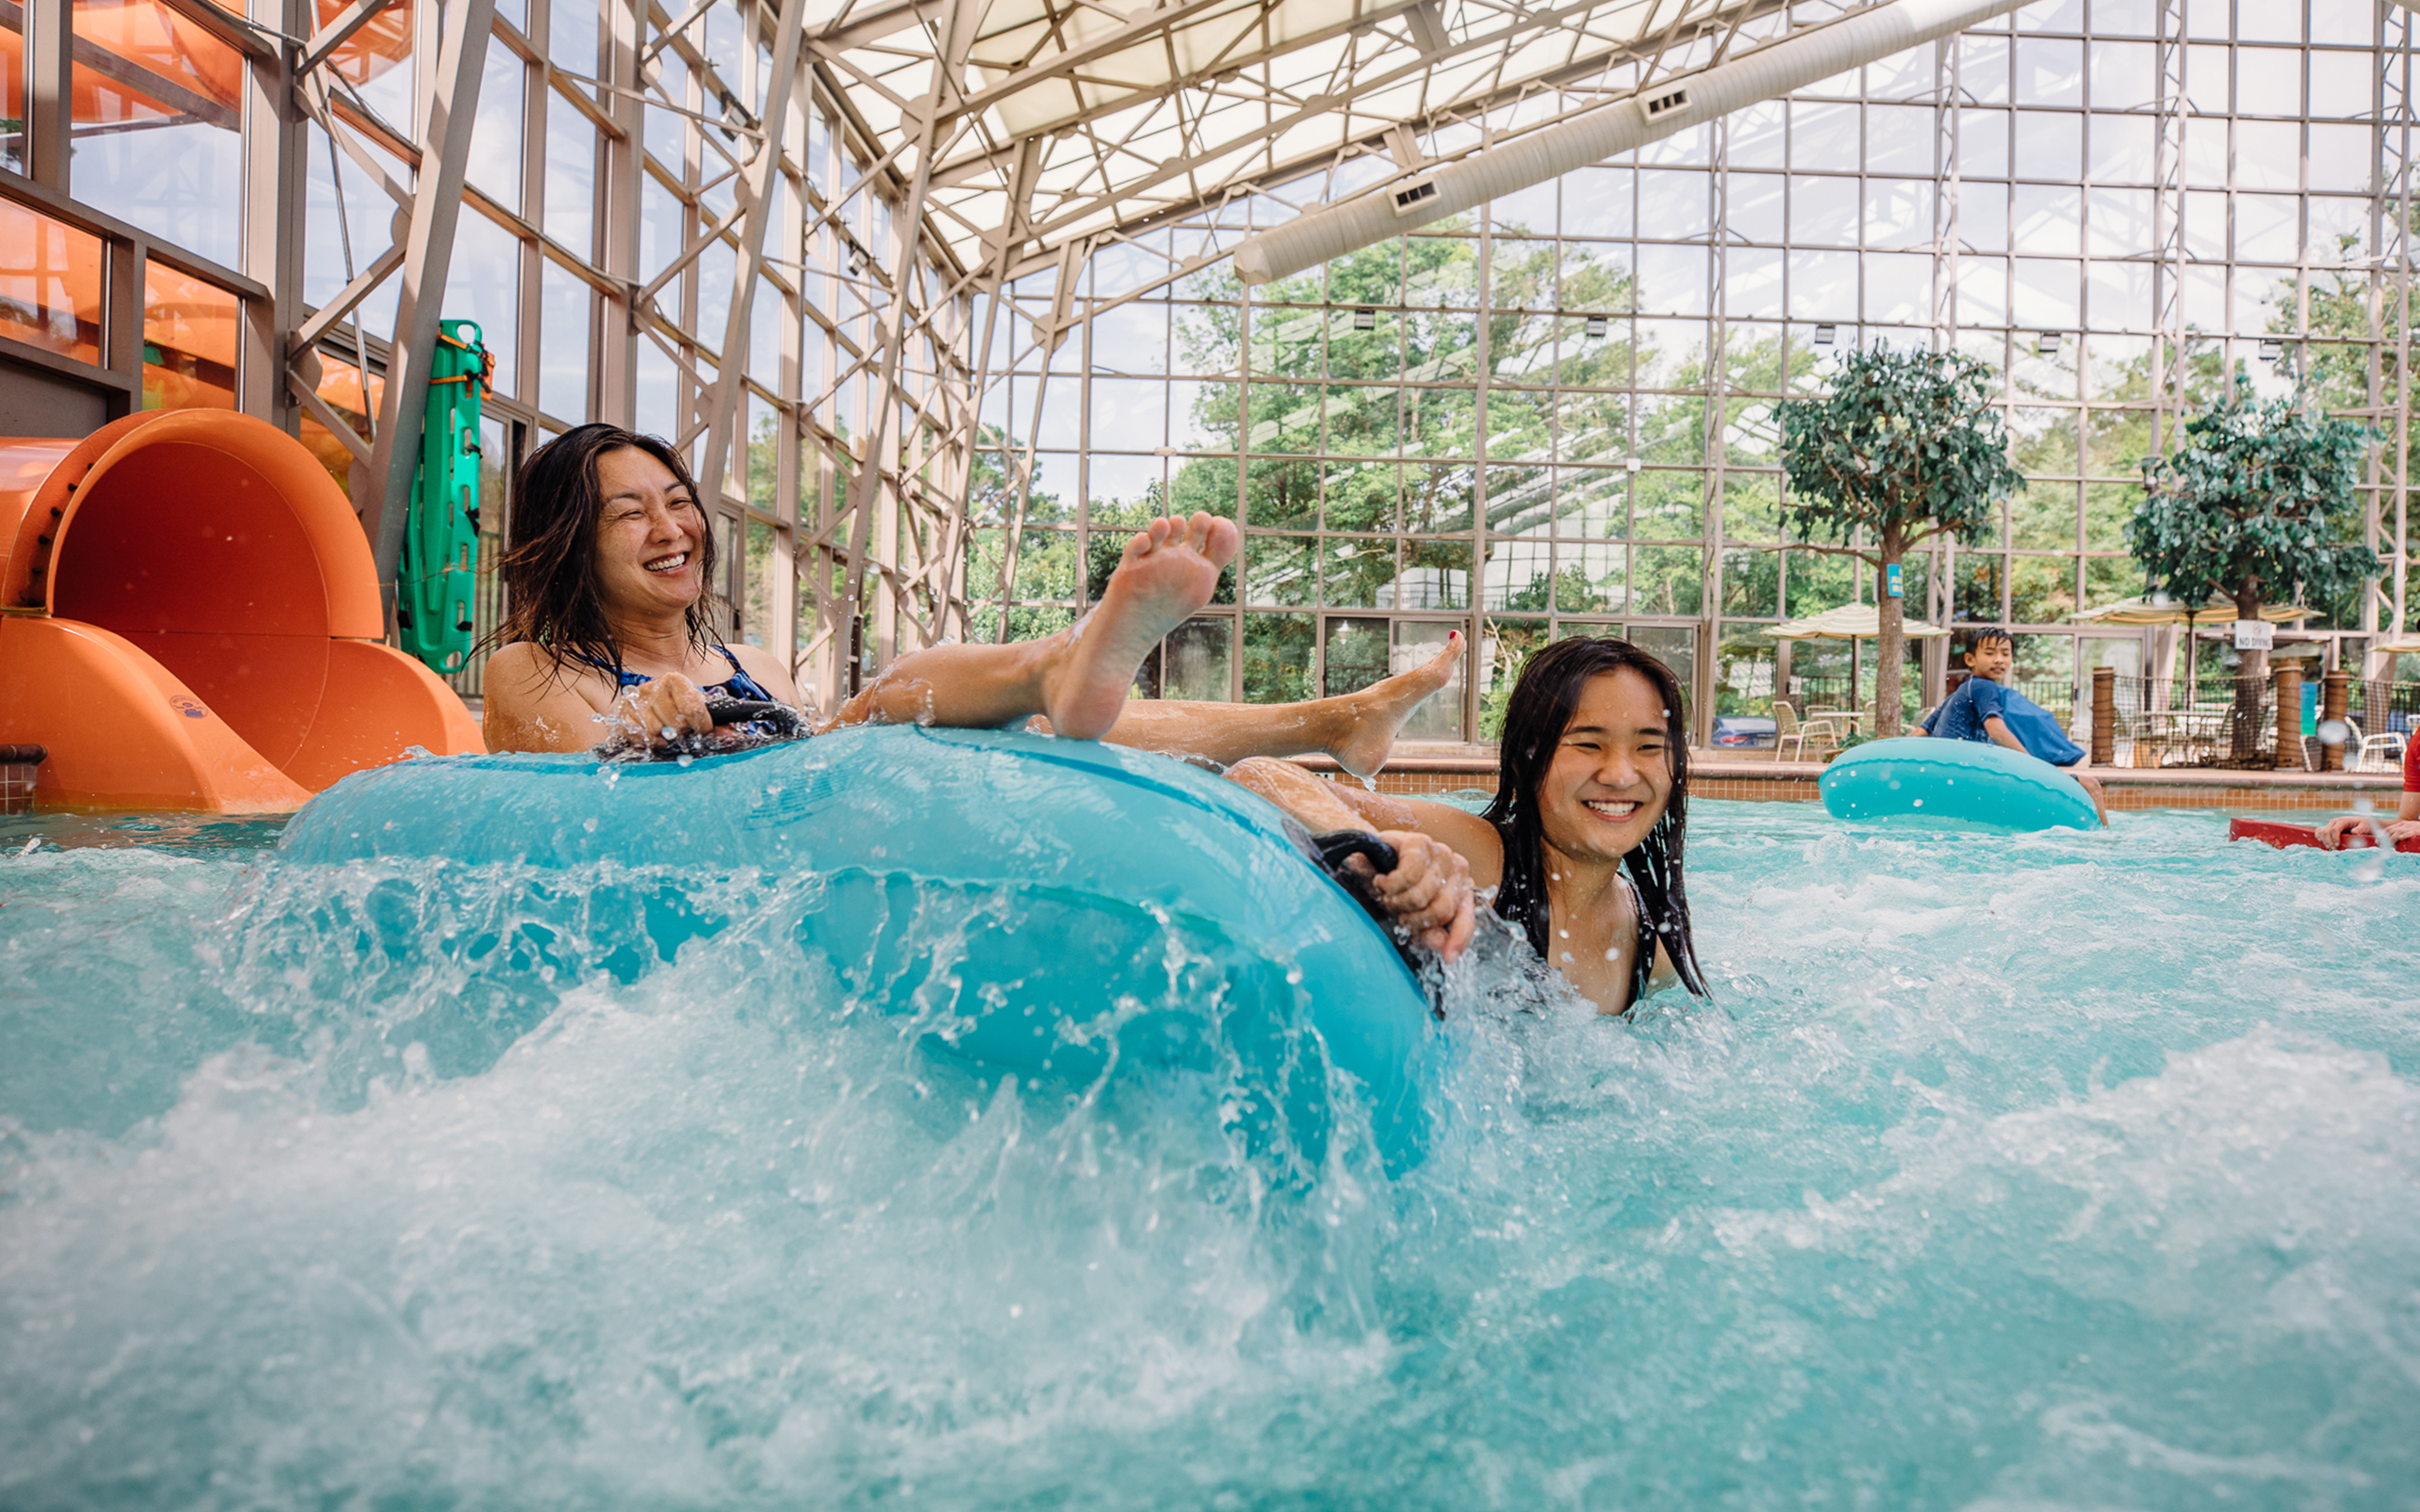 750 Water Park Pictures HD  Download Free Images on Unsplash